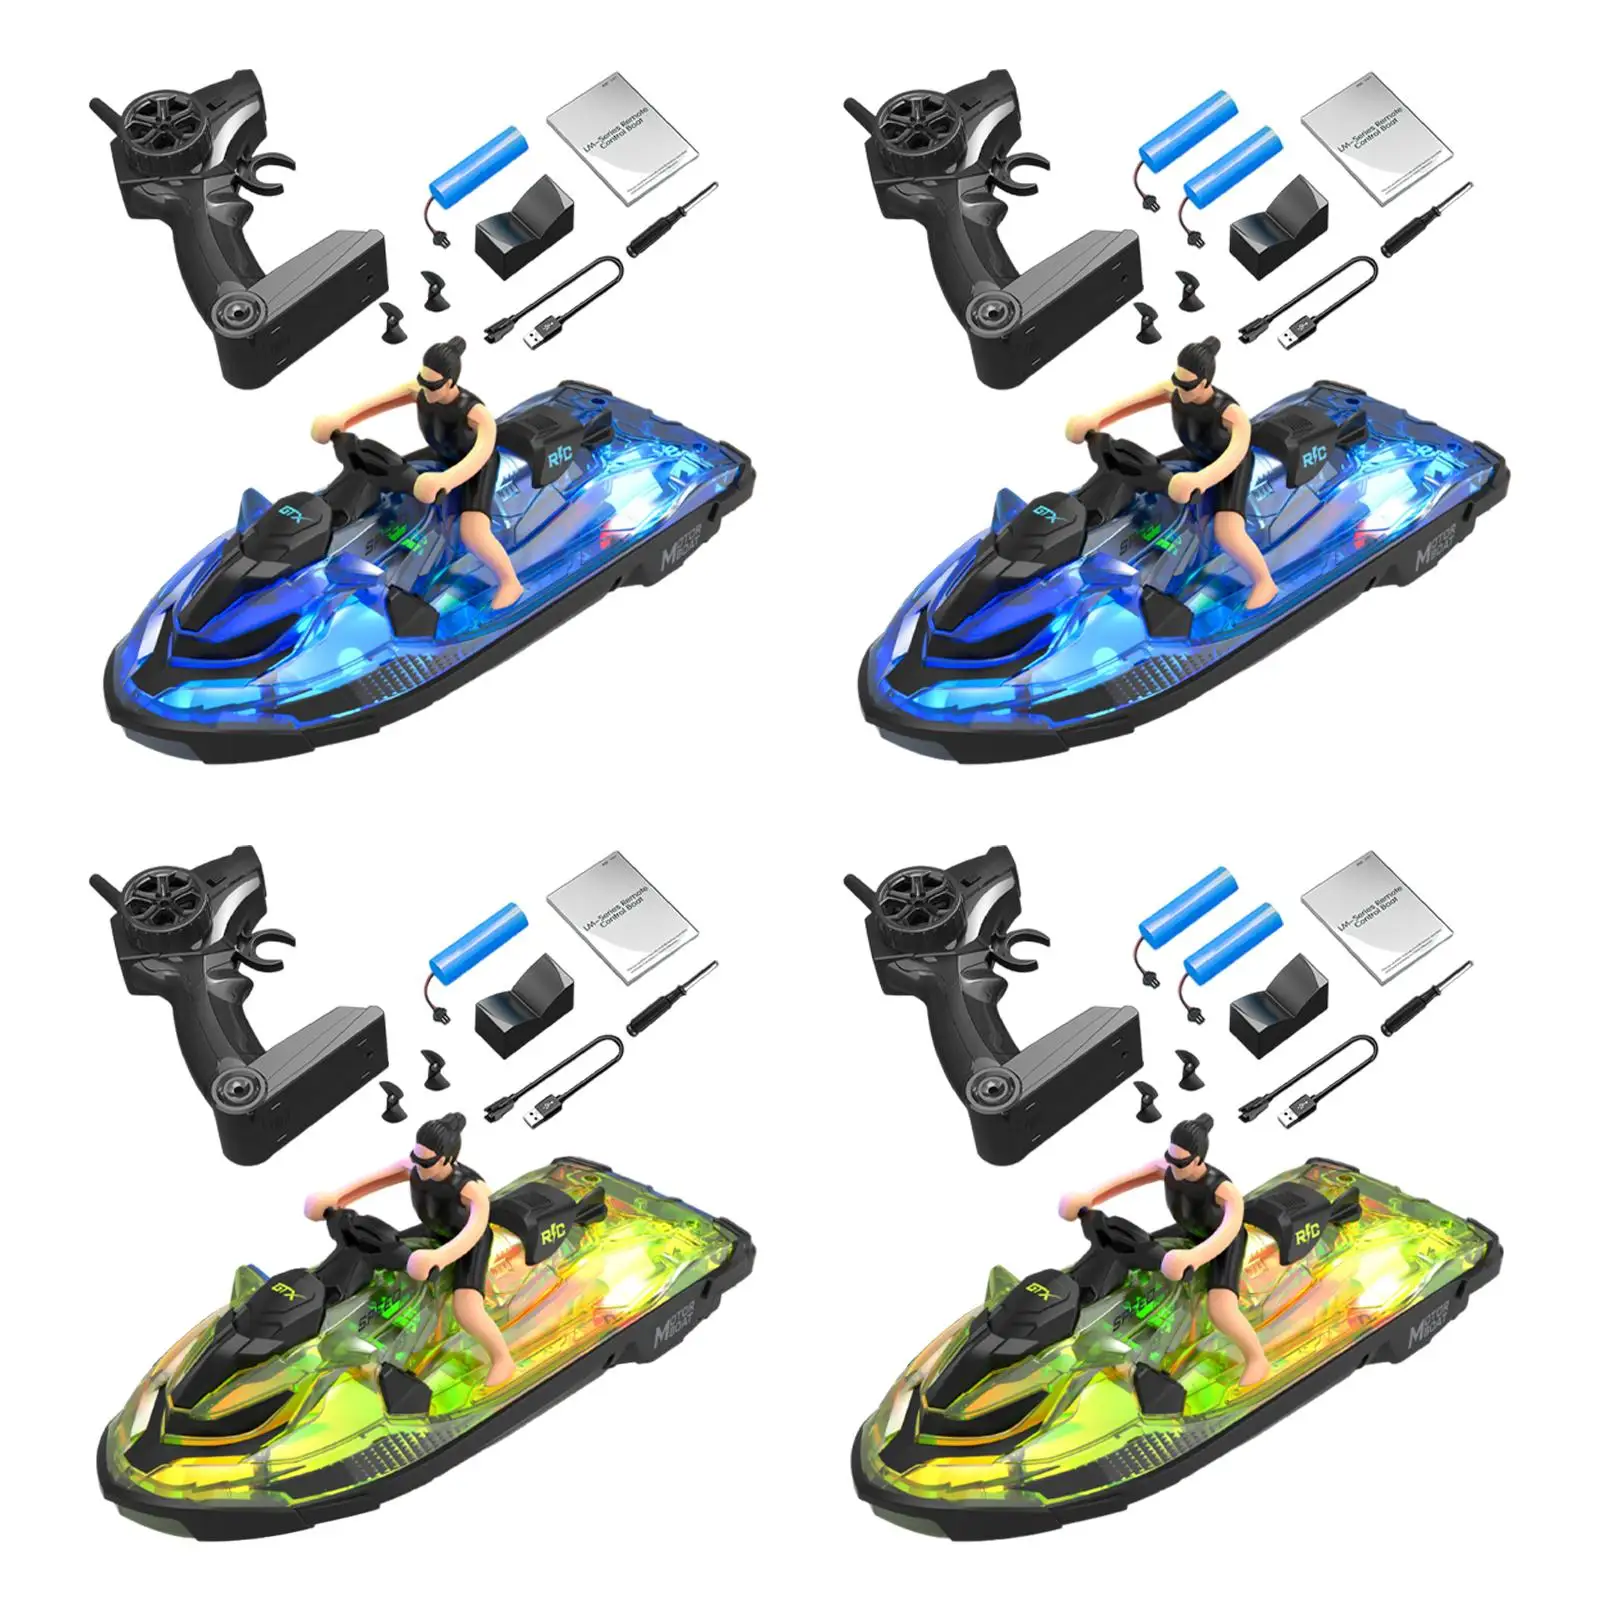 RC Boat Waterproof Swimming Pool Simulation Flexible for Pools and Lakes Ship Toy High Speed RC Boat for Girls Boys Adults Gifts